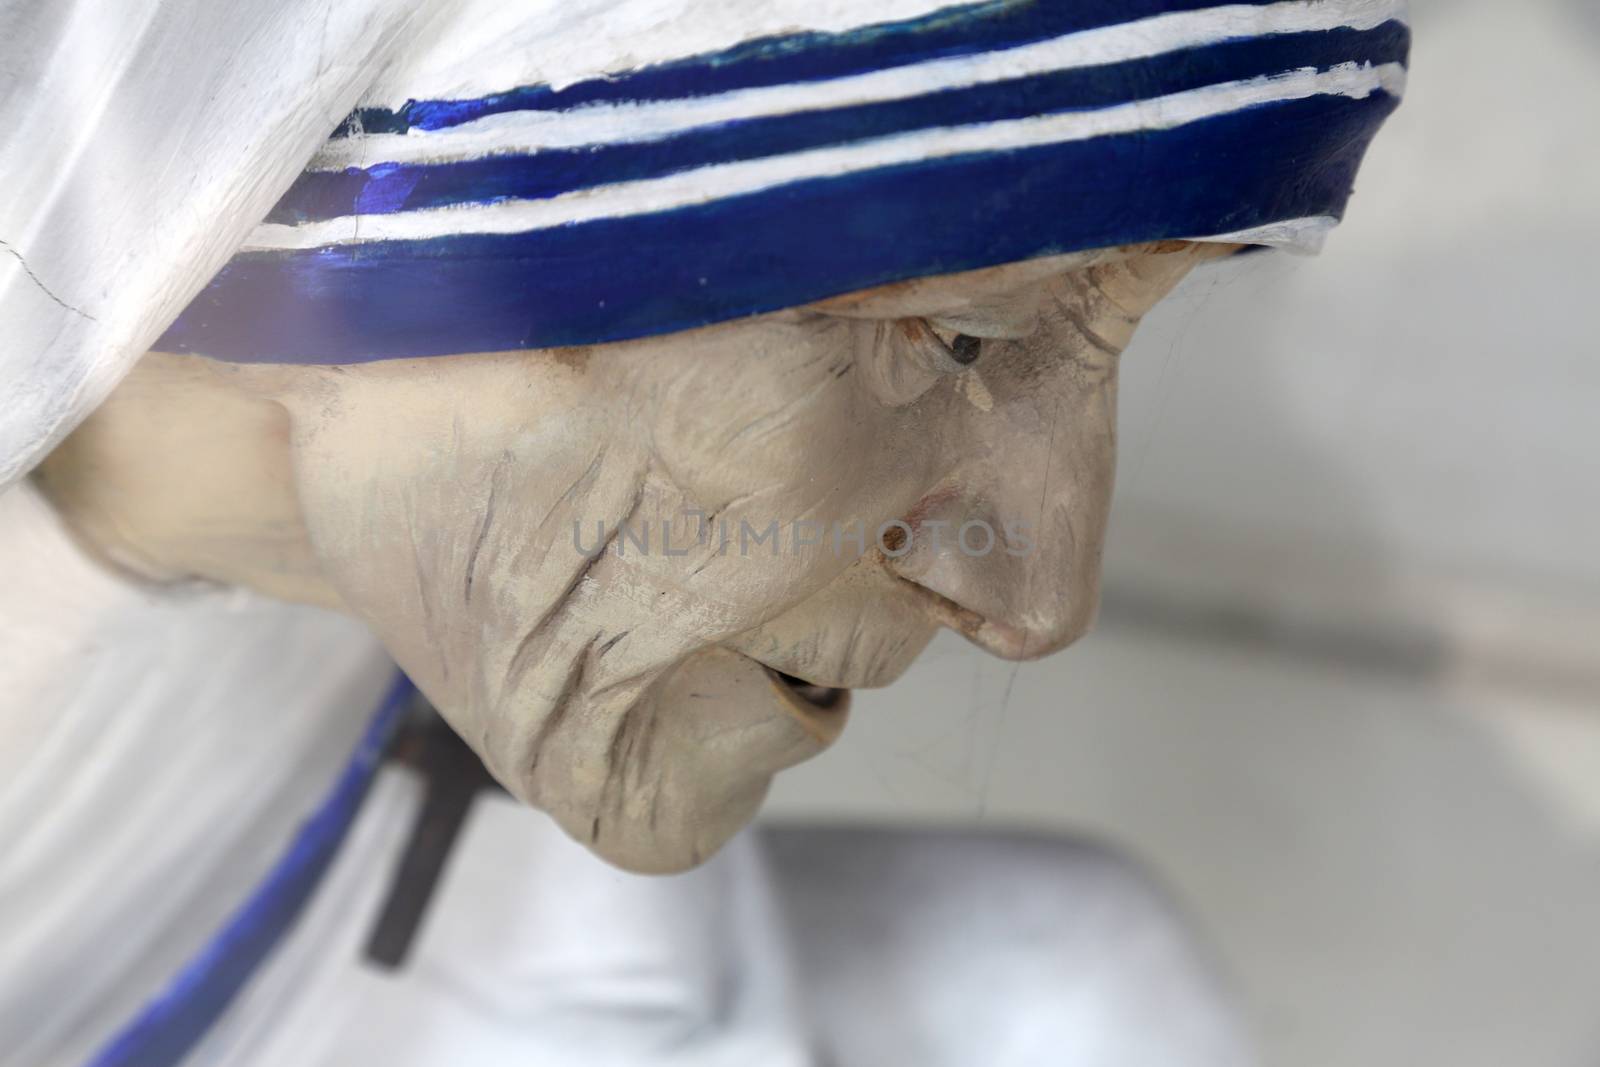 Mother Teresa statue, Shishu Bhavan, one of the houses established by Mother Teresa and run by the Missionaries of Charity in Kolkata, India